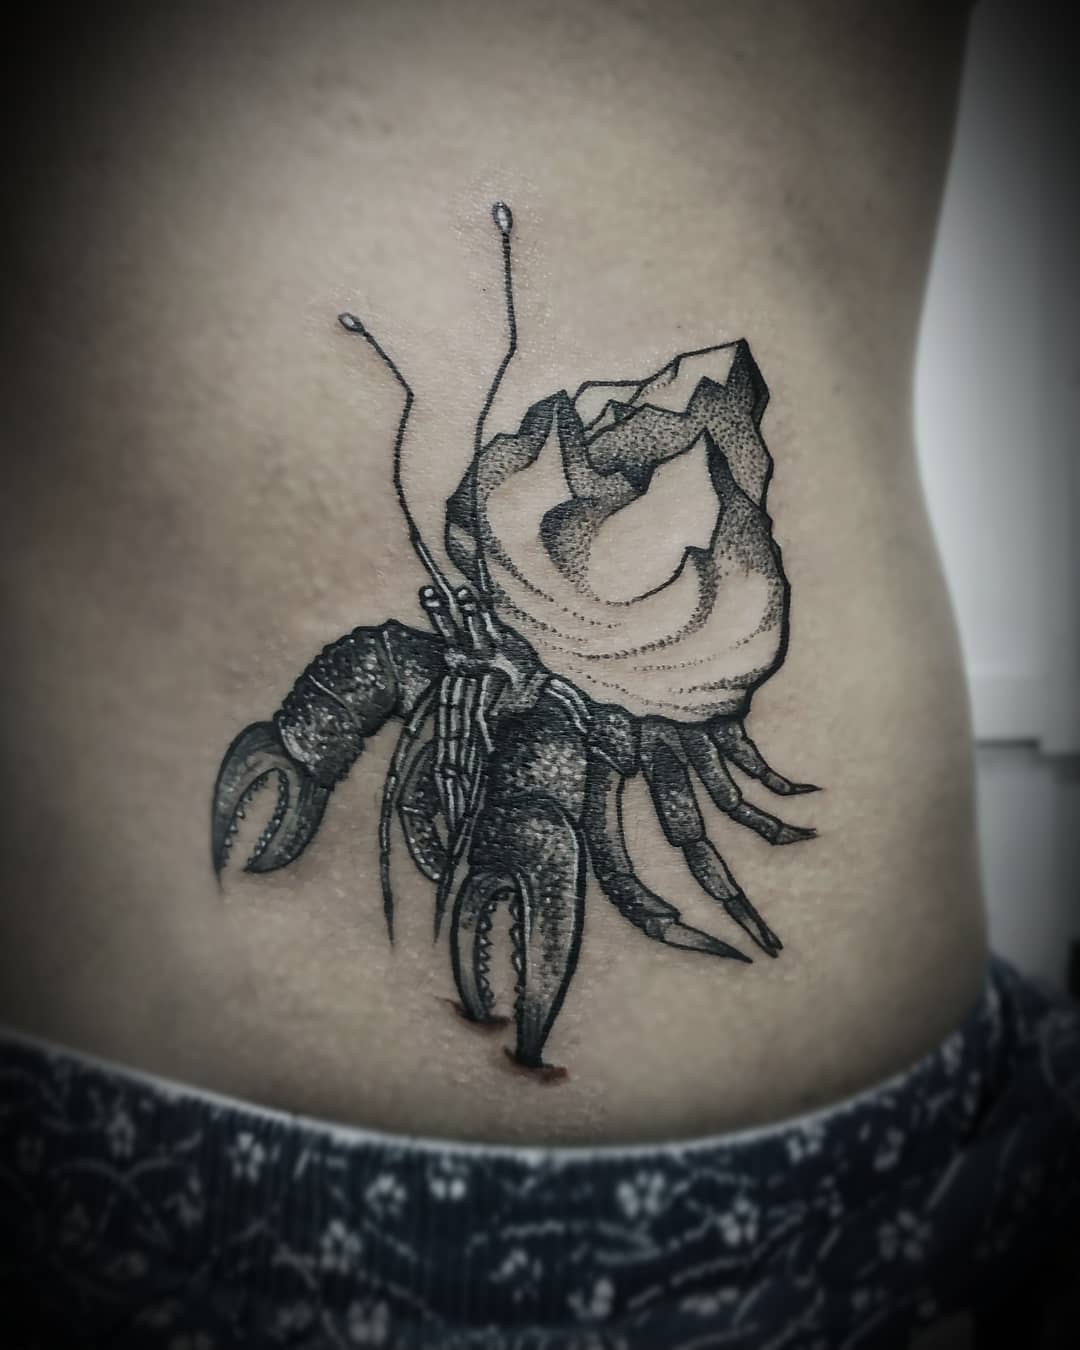 Crab and Mountain Tattoo, Tattoo in Nepal